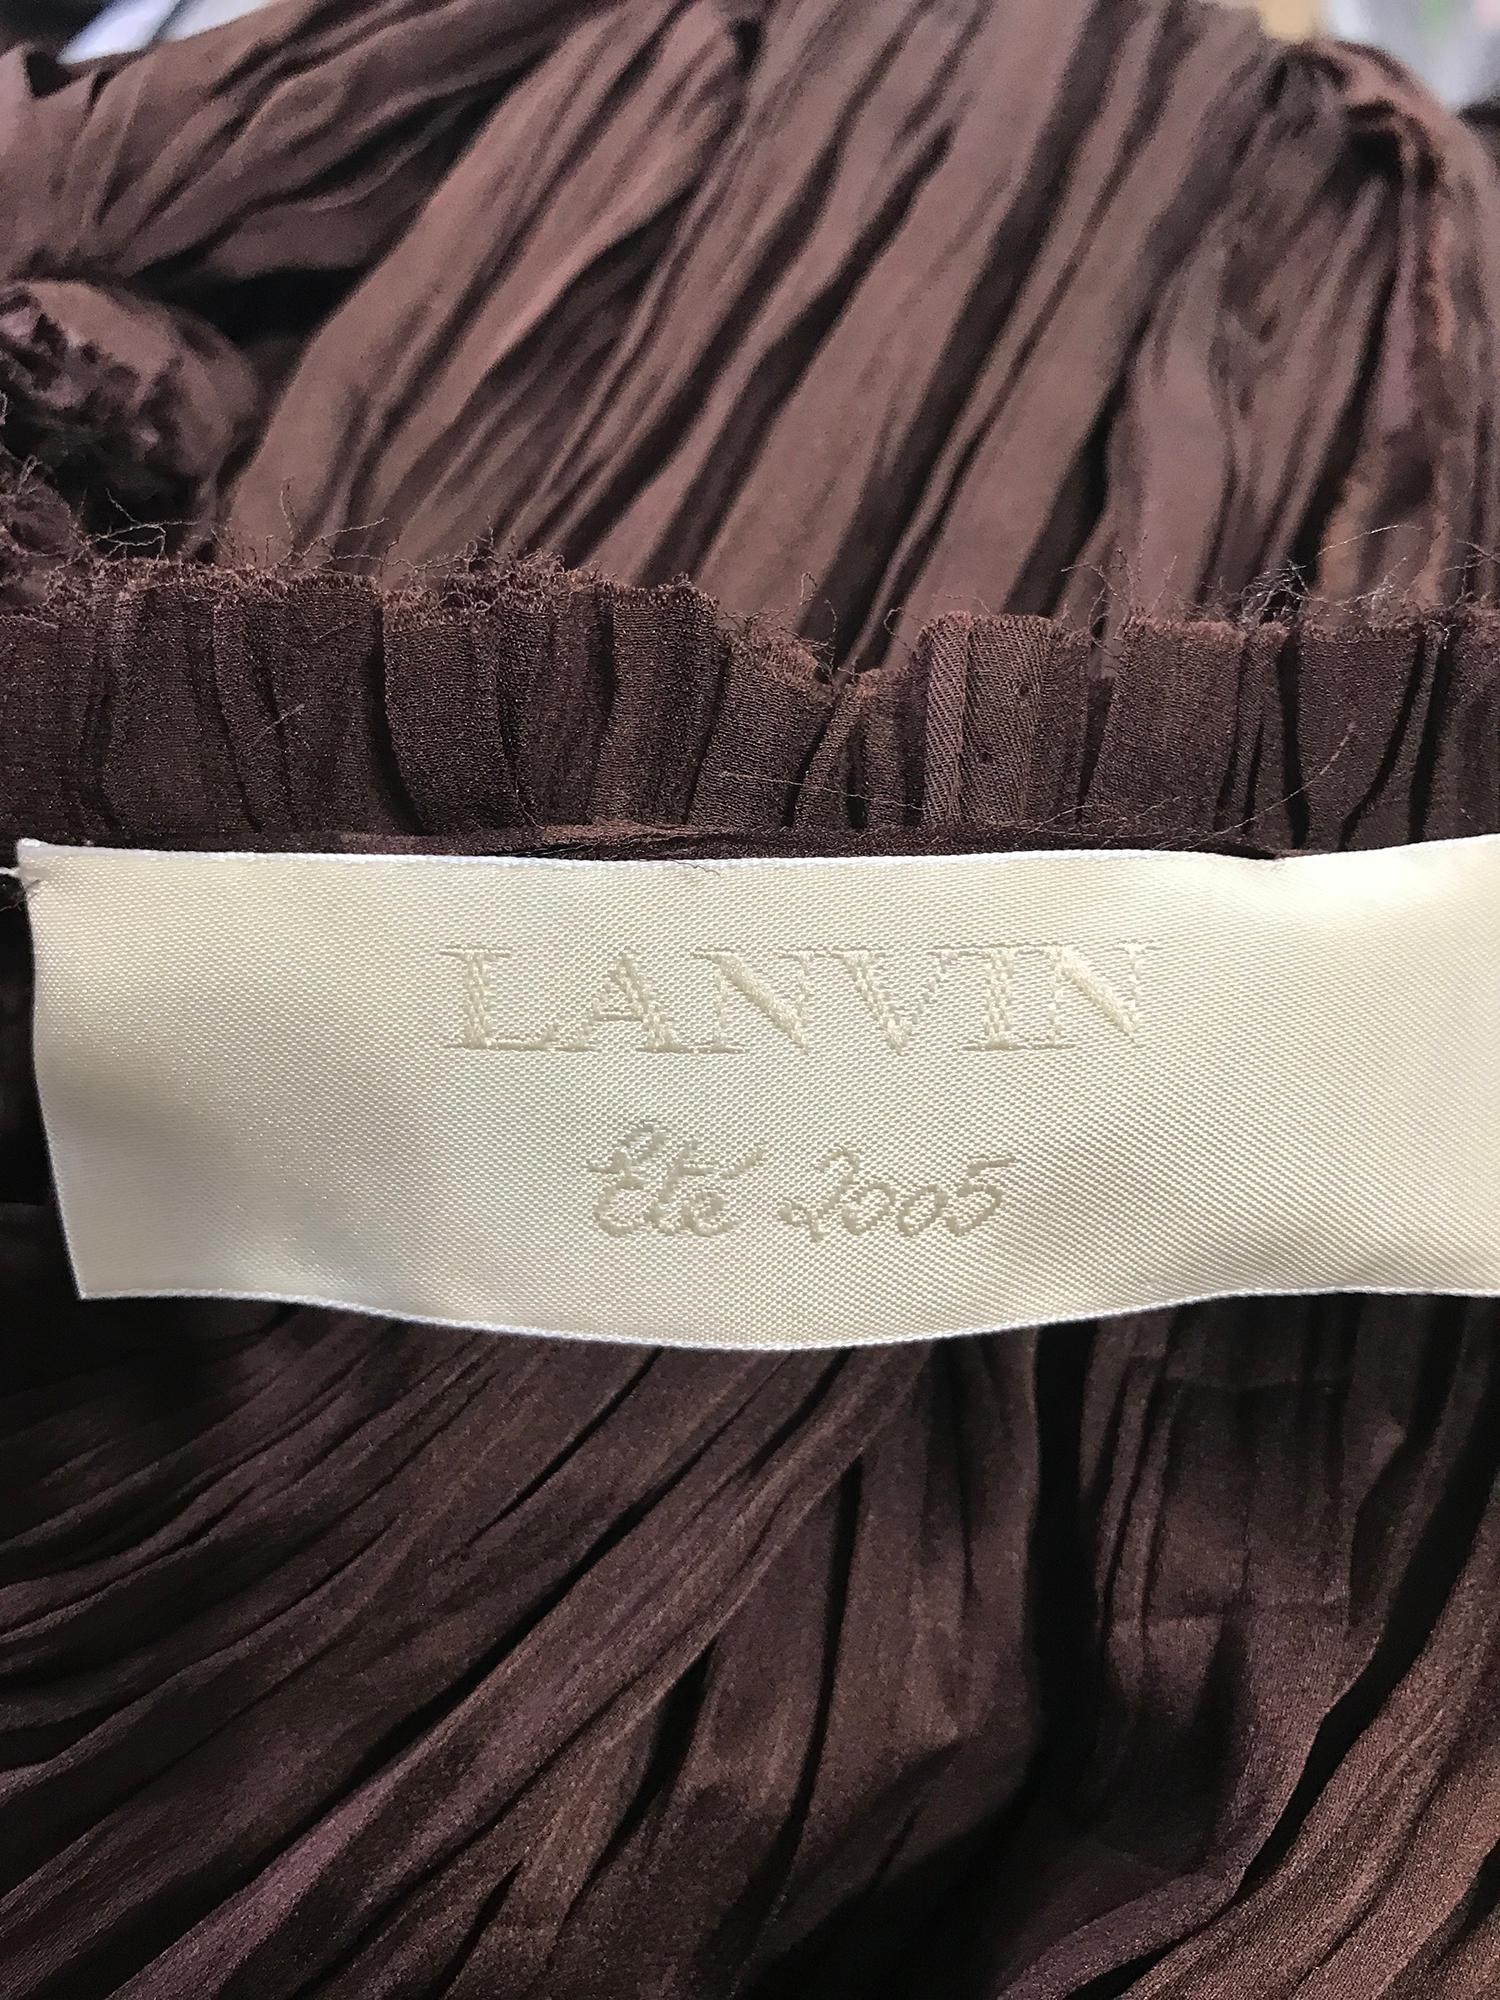 Lanvin Ete' 2005 Fortuny Pleated V Neck Maxi Dress Chocolate Brown Alber Elbaz 6